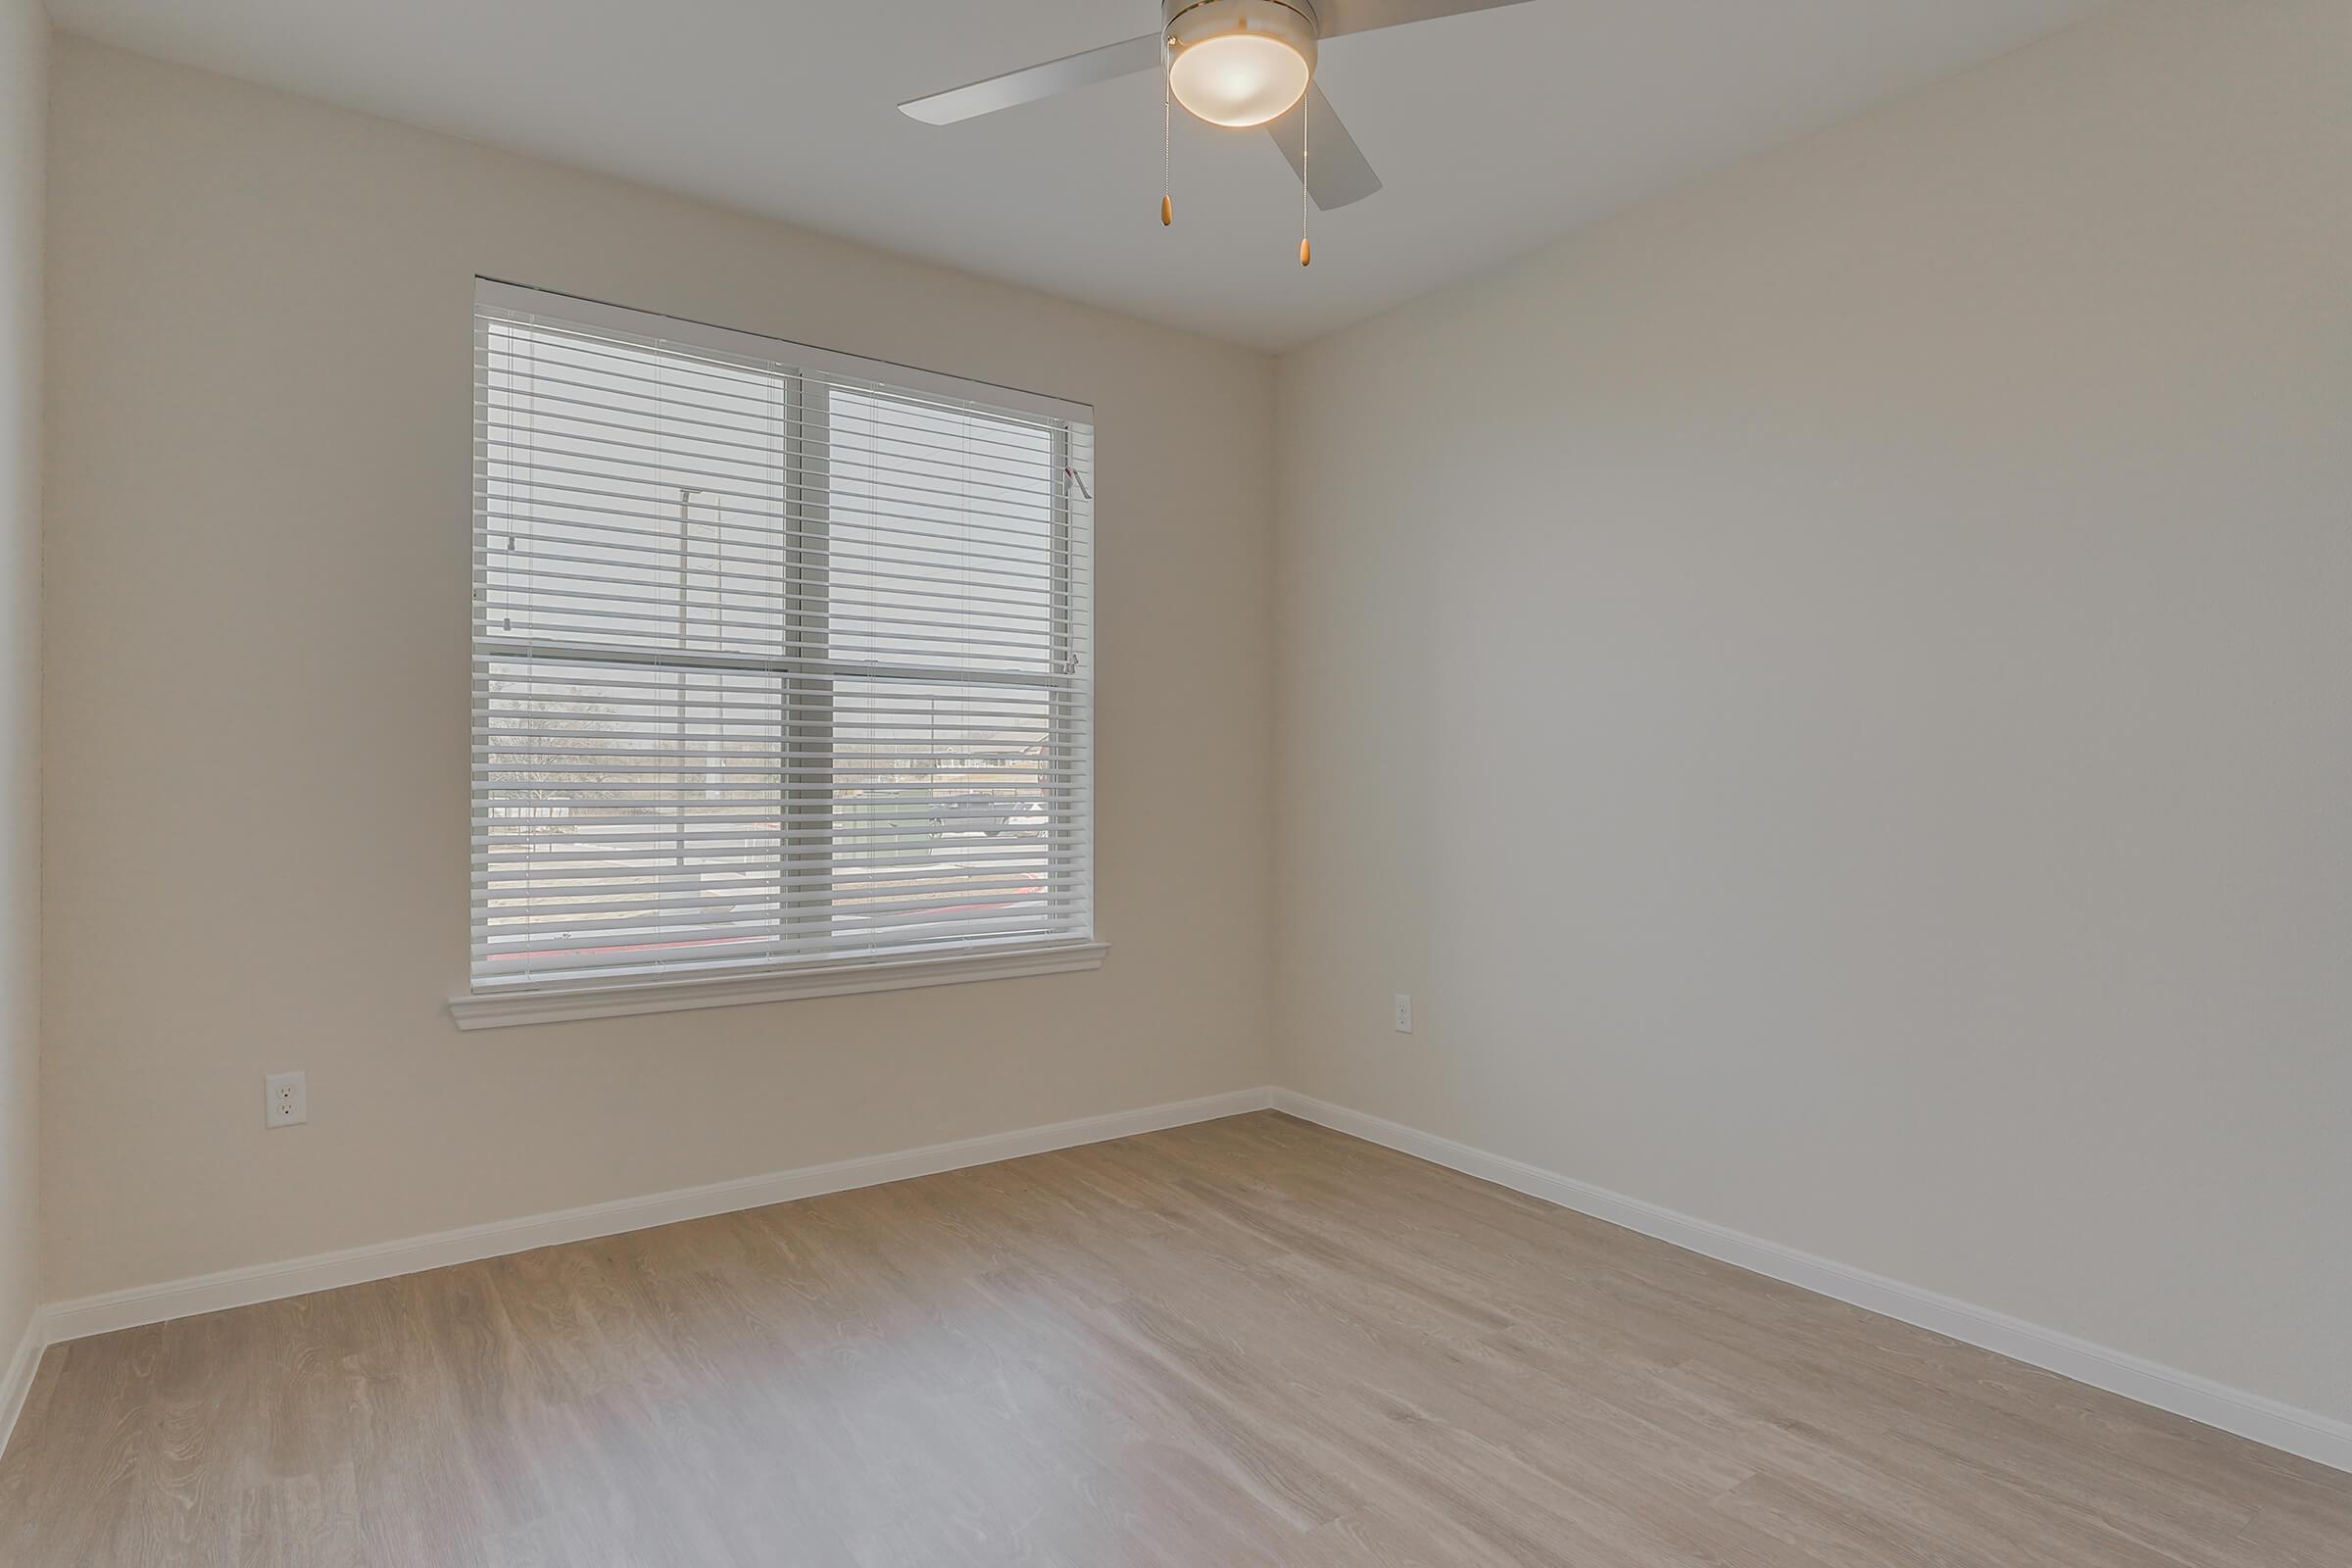 Apartments for Rent Pflugerville - Legacy Ranch at Dessau East Spacious Bedroom with a Expansive Closet, Wood-Style Flooring, and Many More Great Bedroom Amenities